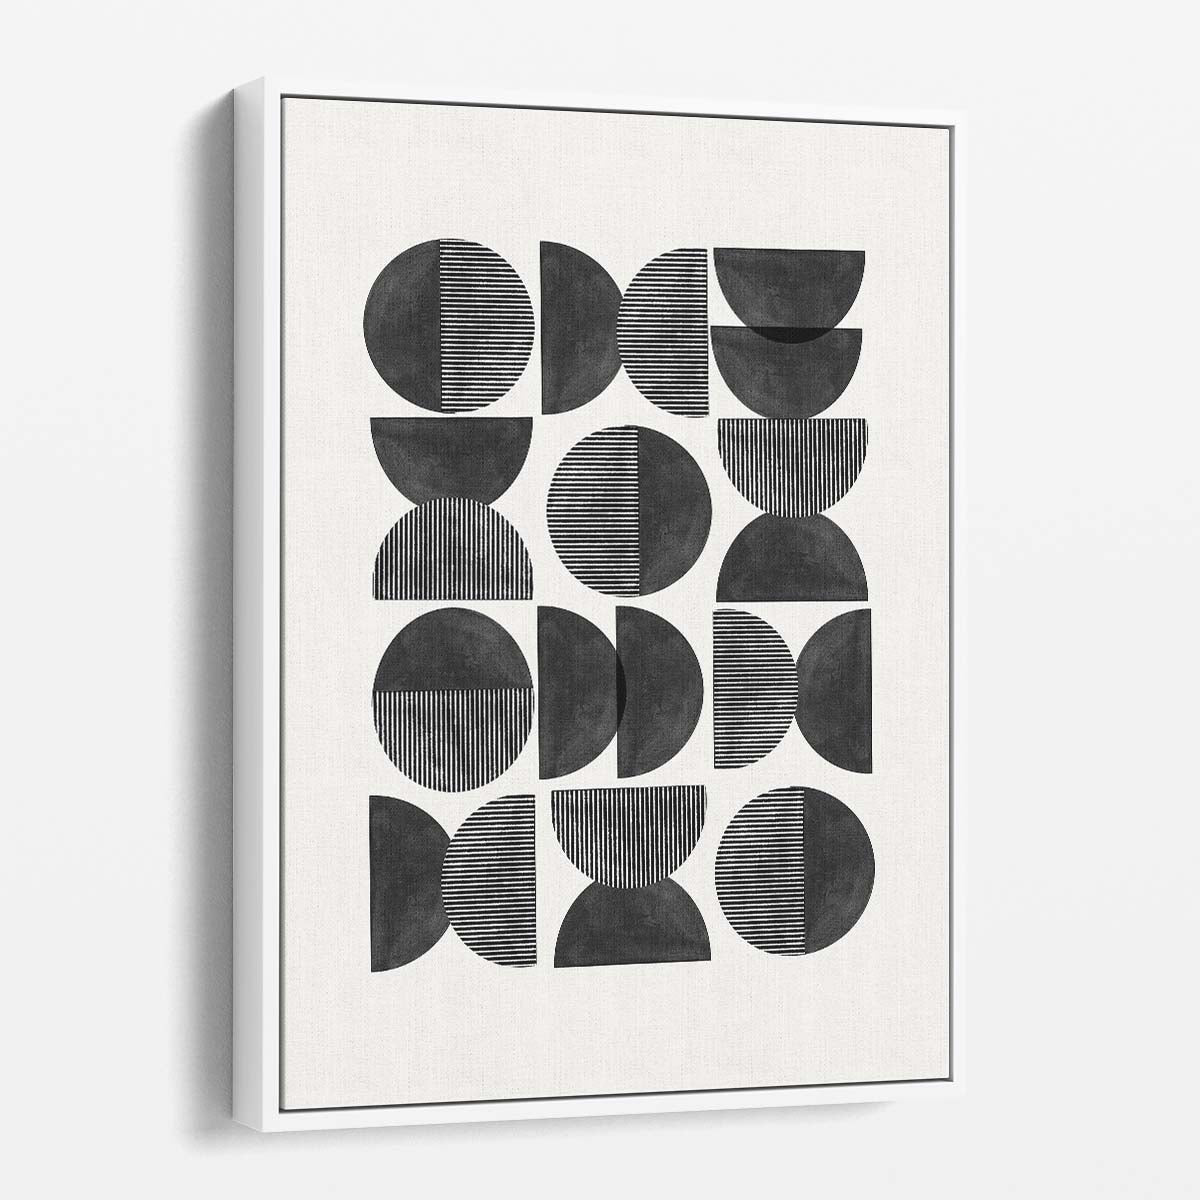 Mid-Century Geometric Illustration Artwork Abstract Monochrome Pattern by THE MIUUS STUDIO by Luxuriance Designs, made in USA